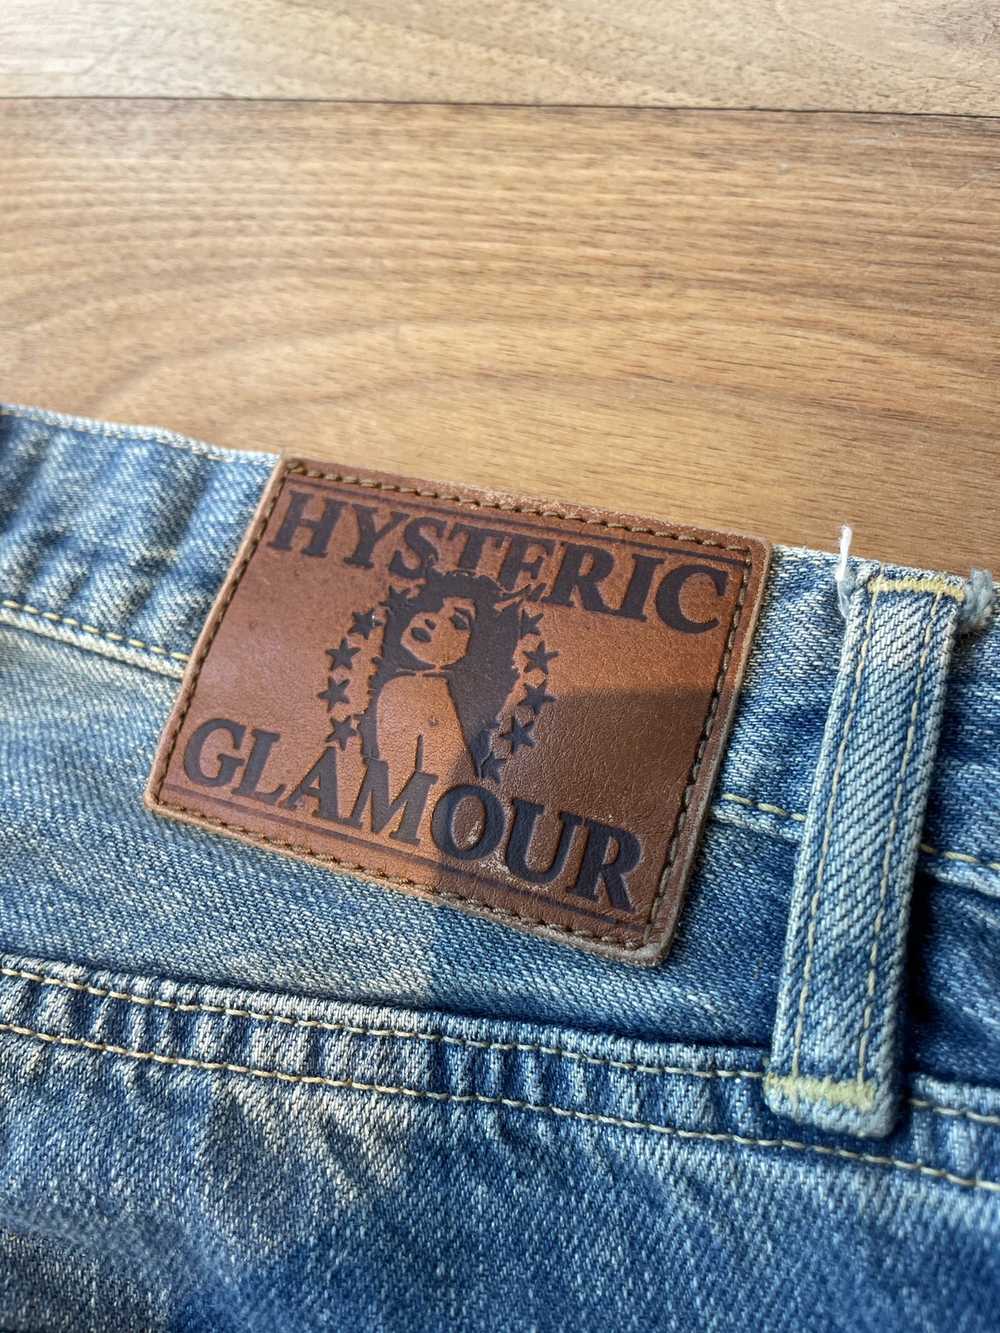 Hysteric Glamour Hysteric Glamour Patchwork Denim - image 7